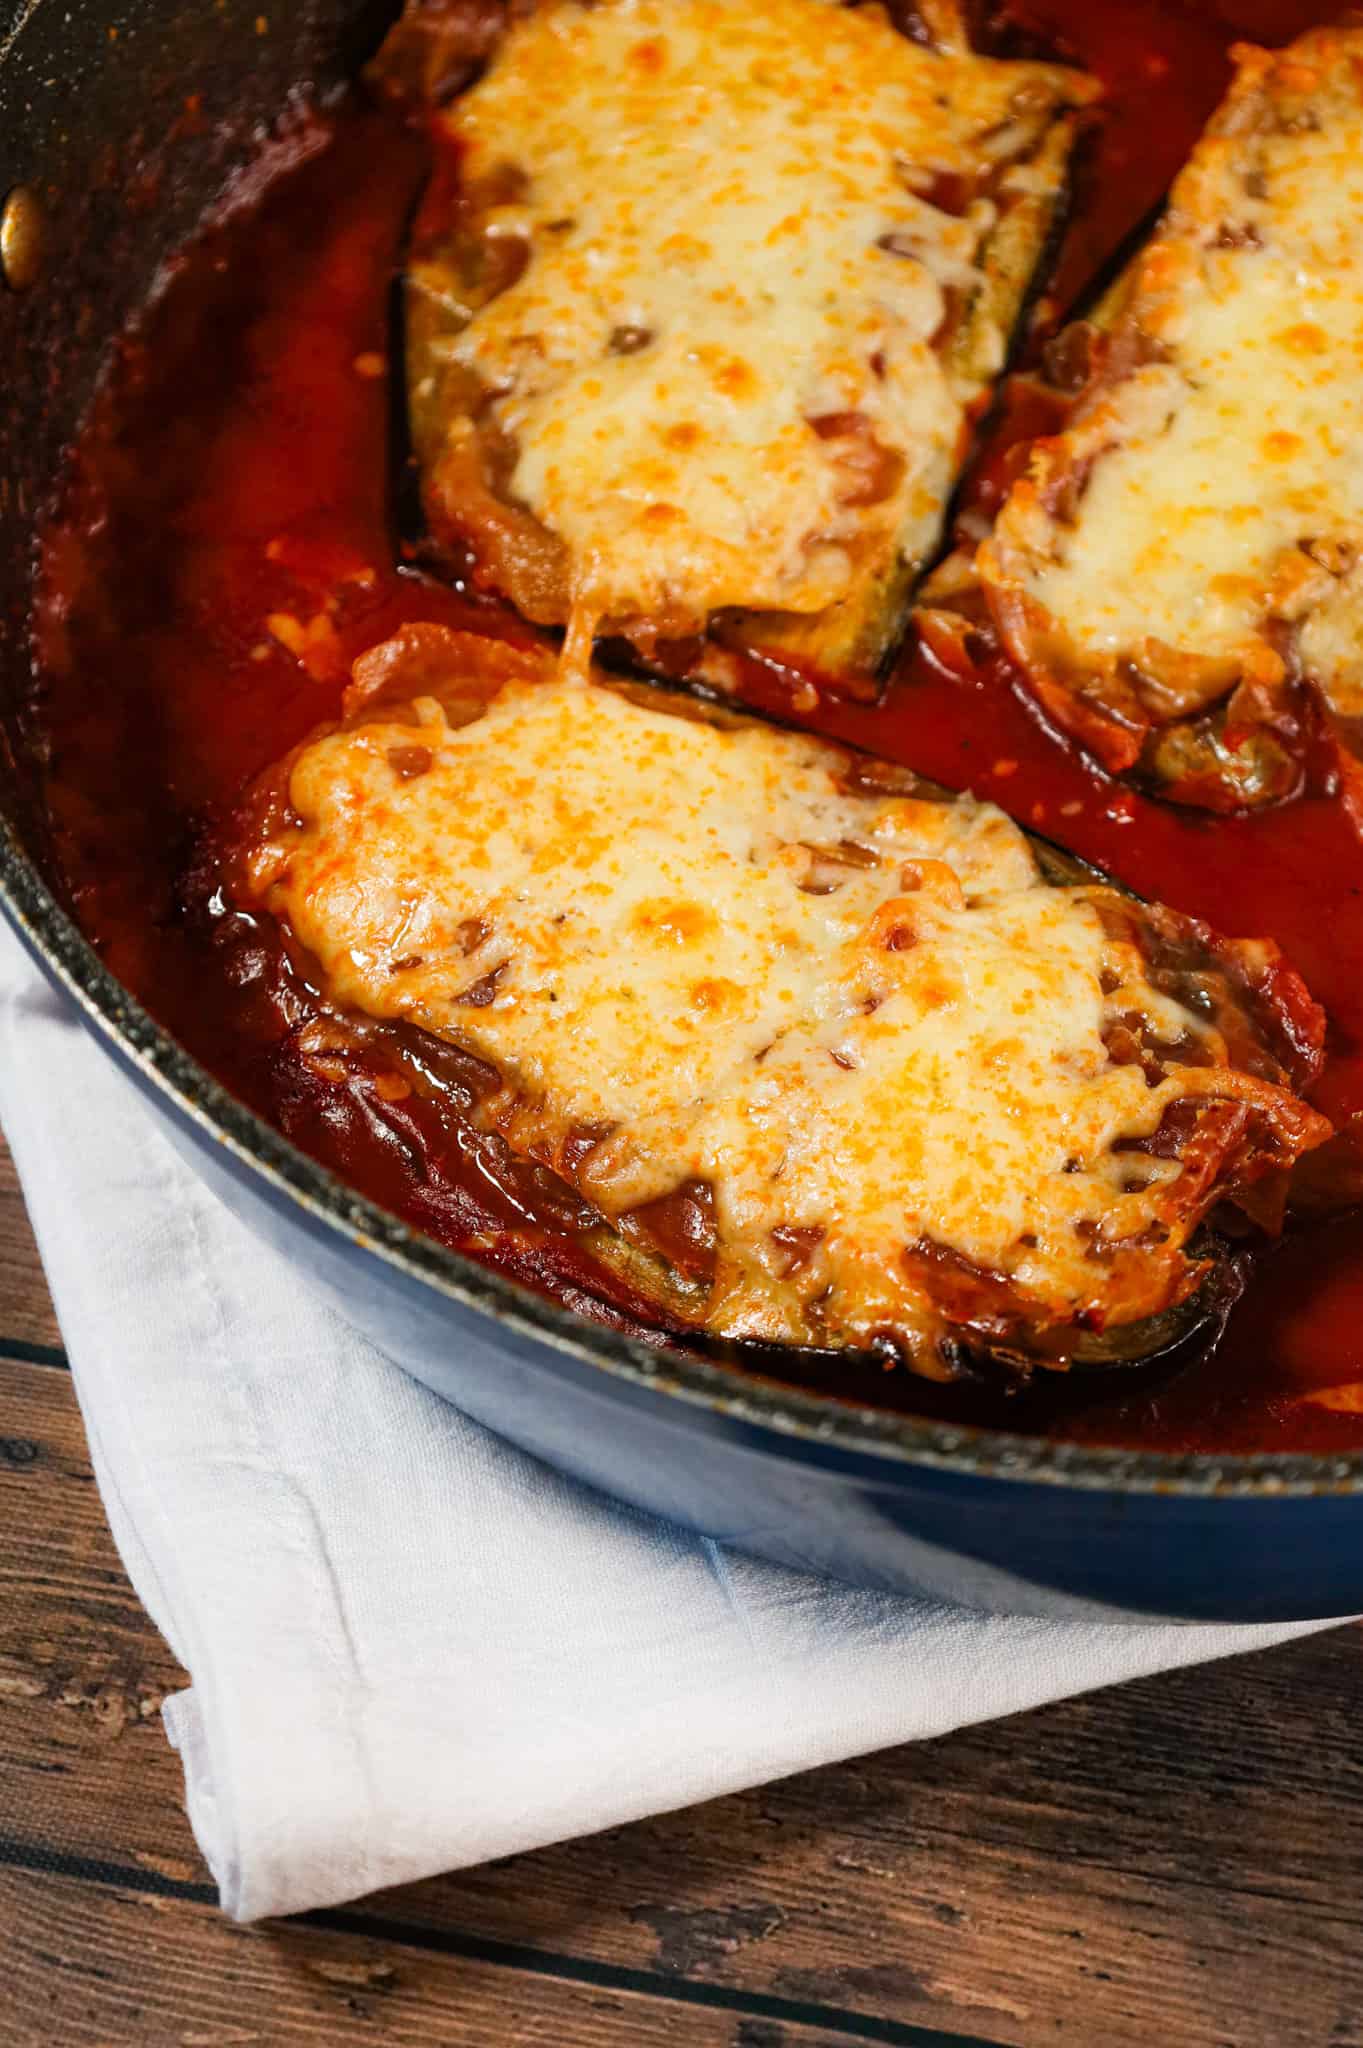 Chicken Sorrentino is a delicious chicken breast dish with roasted eggplant, prosciutto, a tomato marsala sauce and shredded cheese.